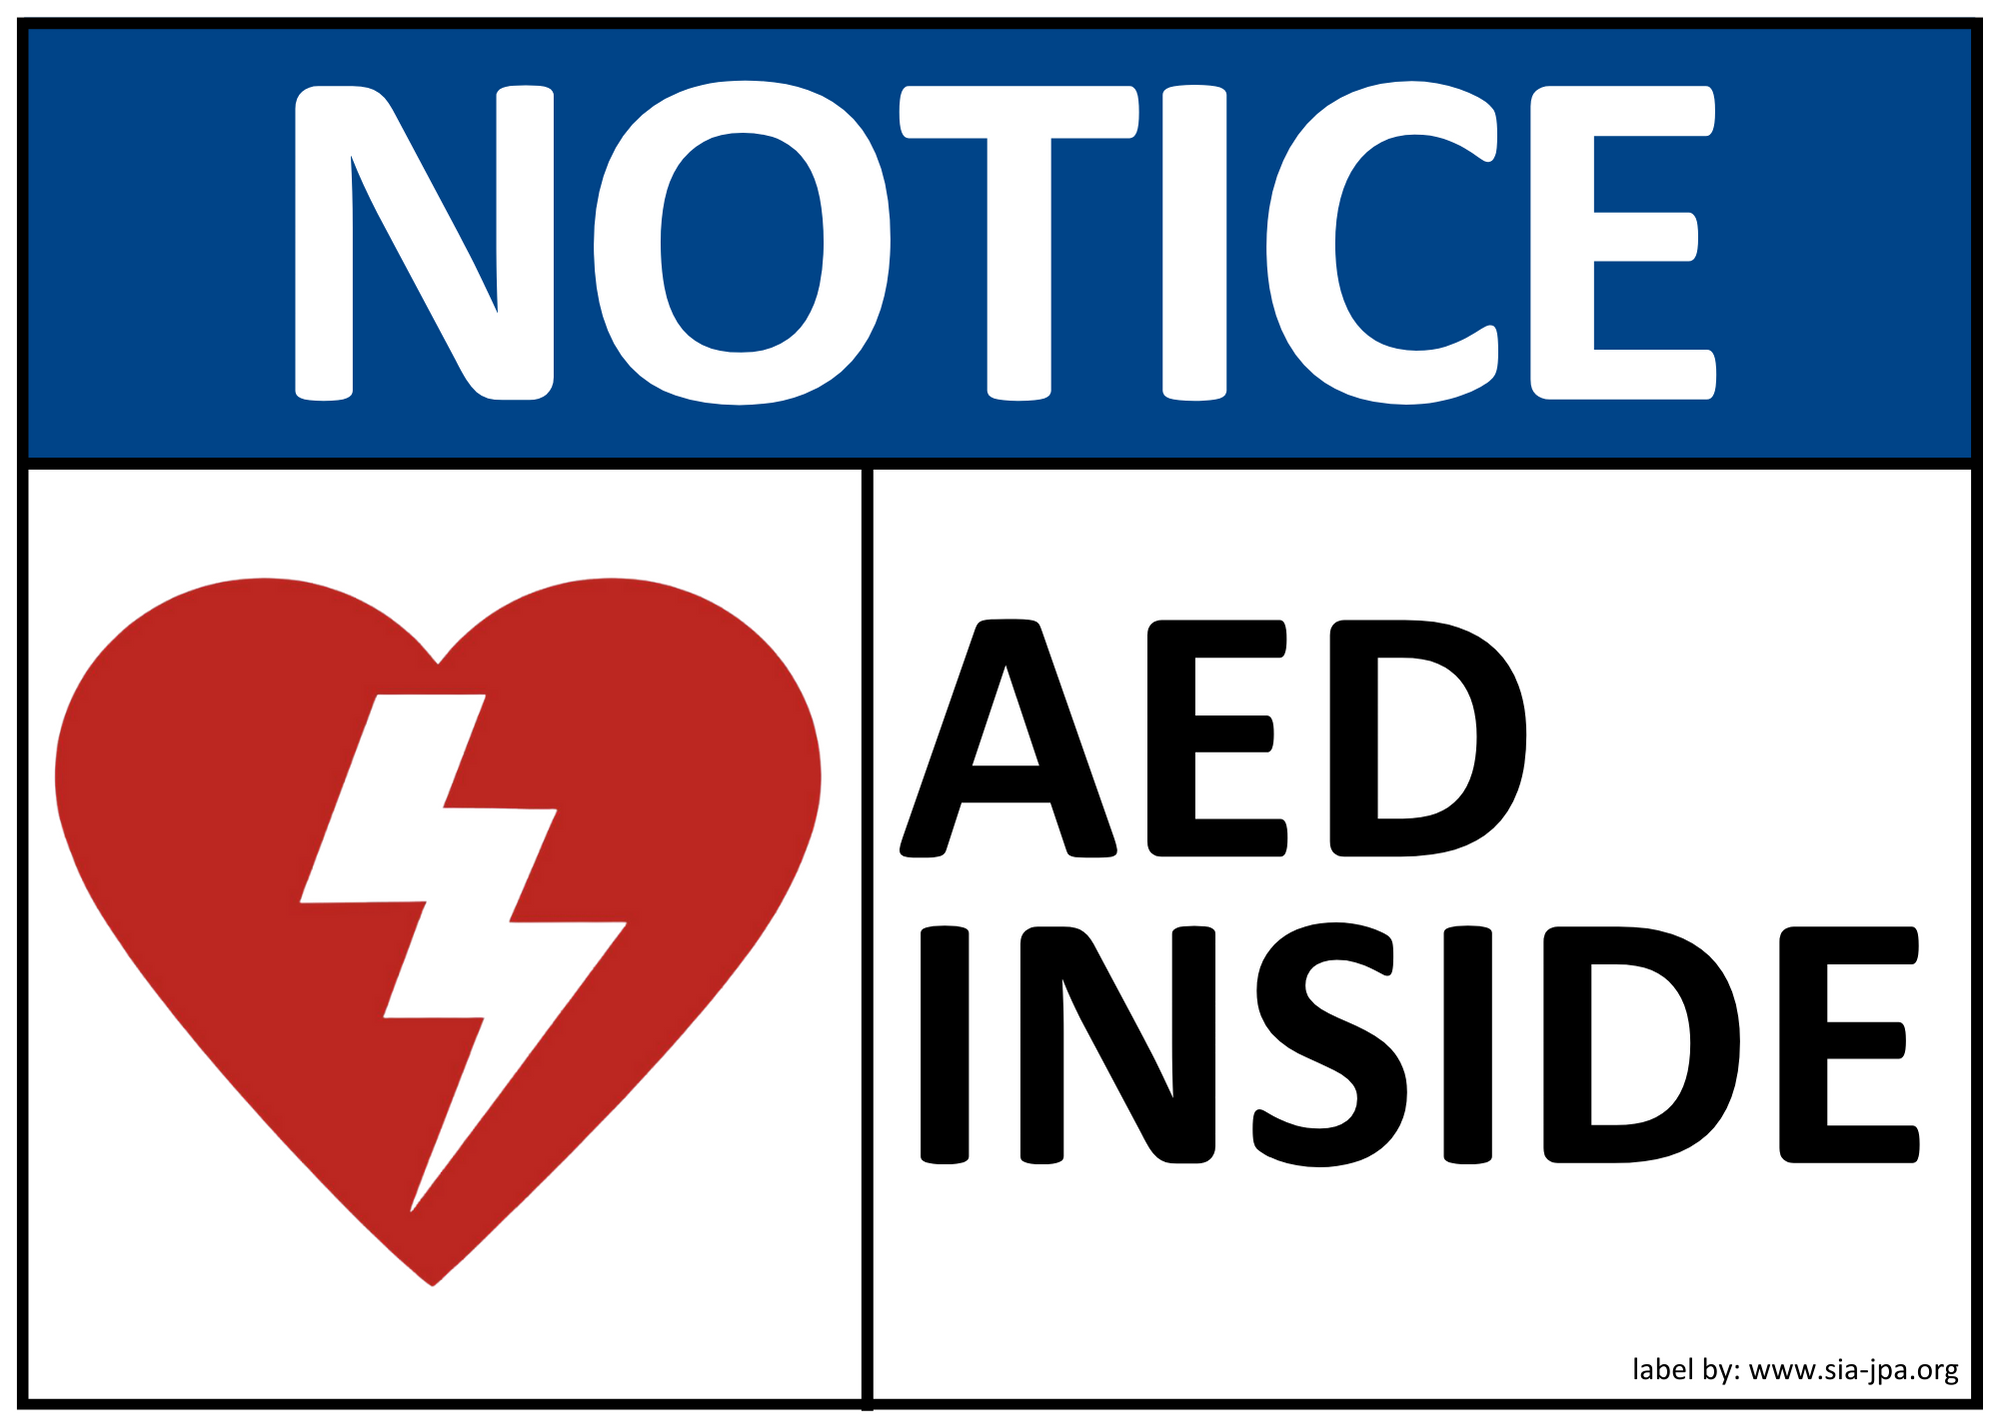  NOTICE AED Inside text with large heart shape symbol containing lightning bolt graphic. SIA for Kids logo